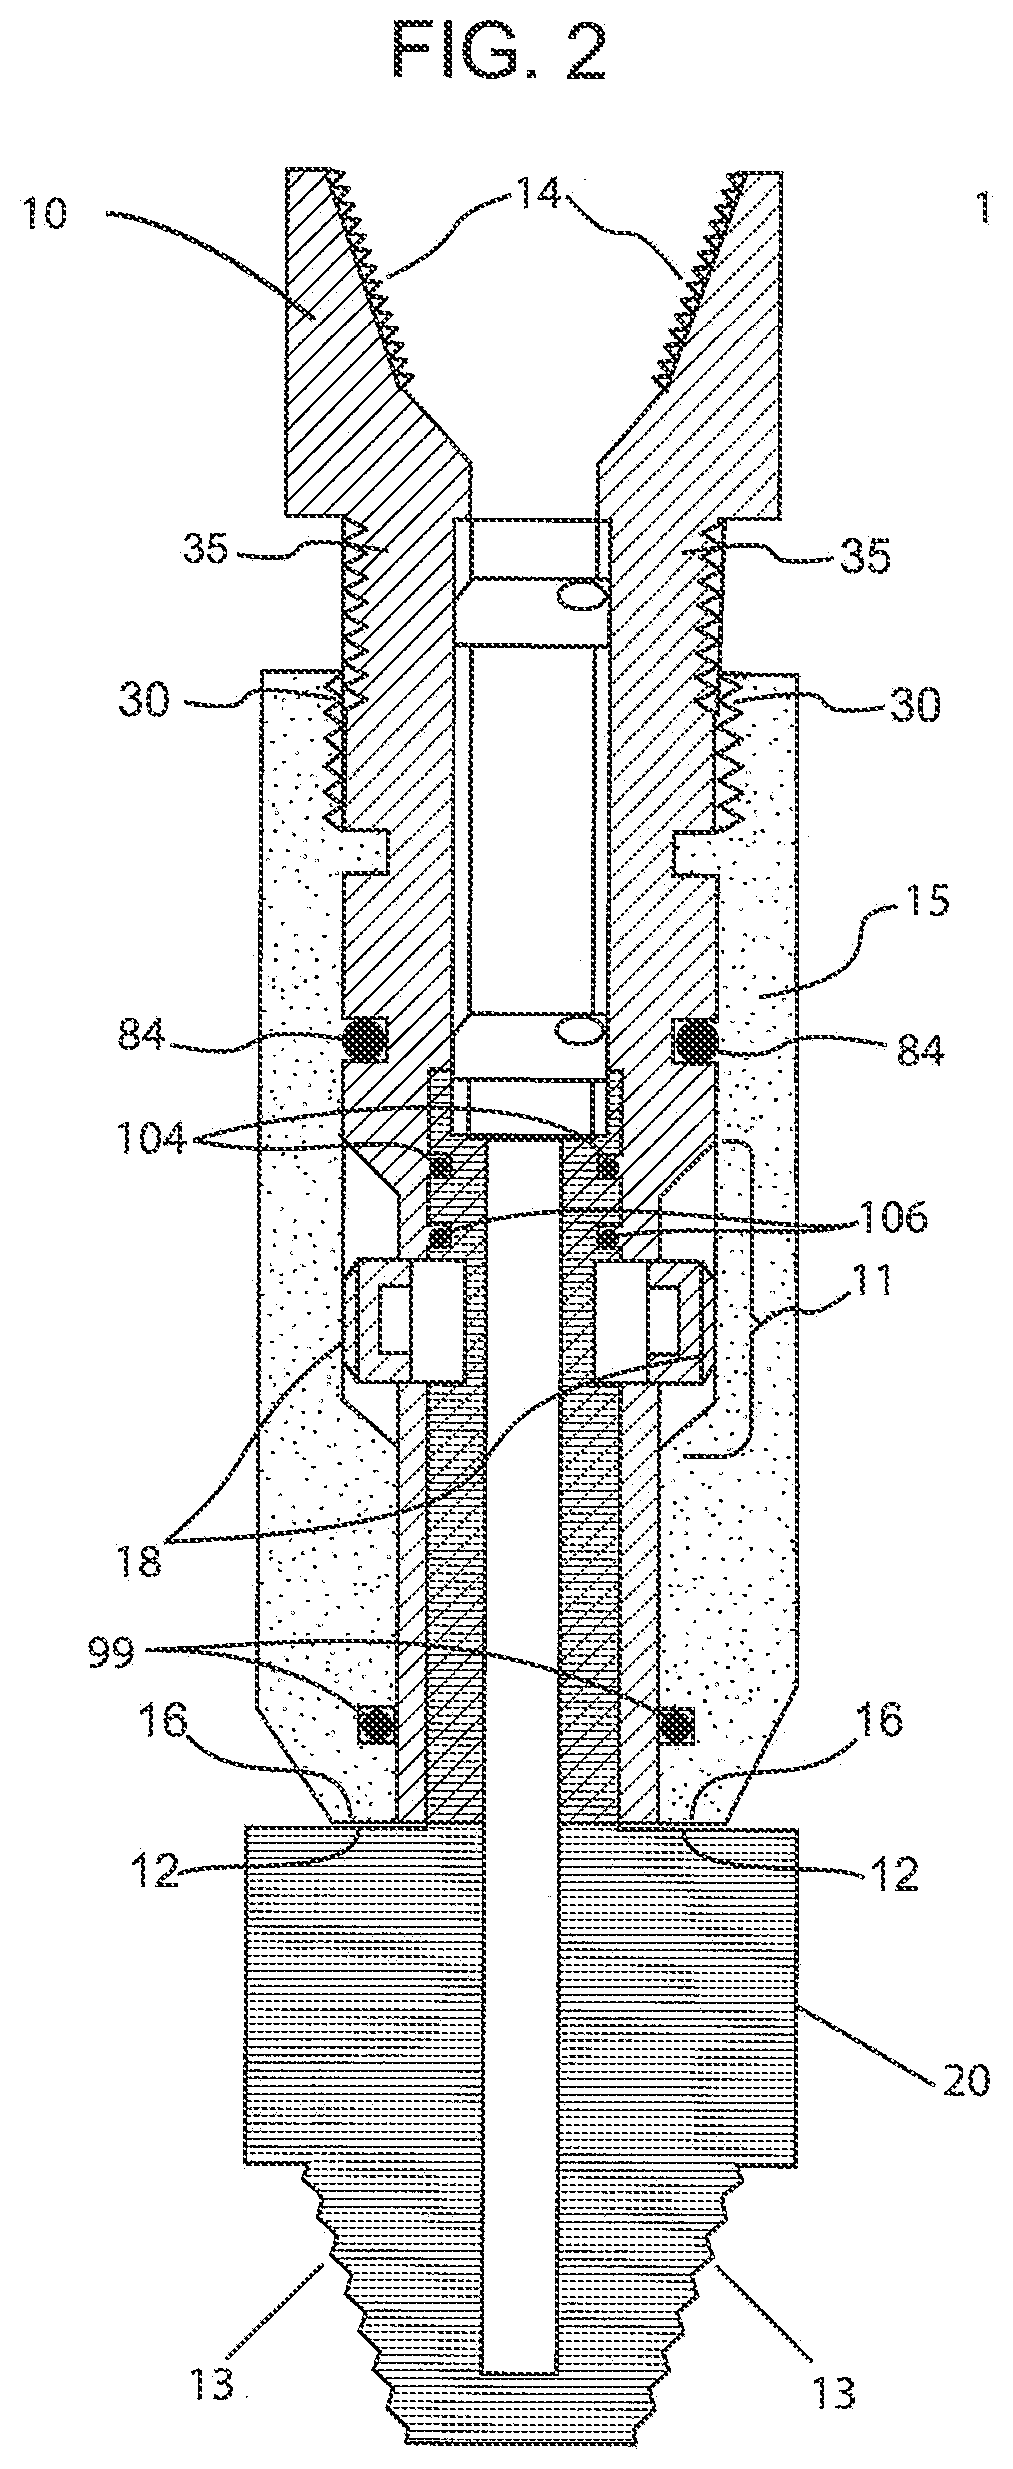 Manual pipe valve connector for jointed pipe connections with quick release check valve assembly and uses thereof